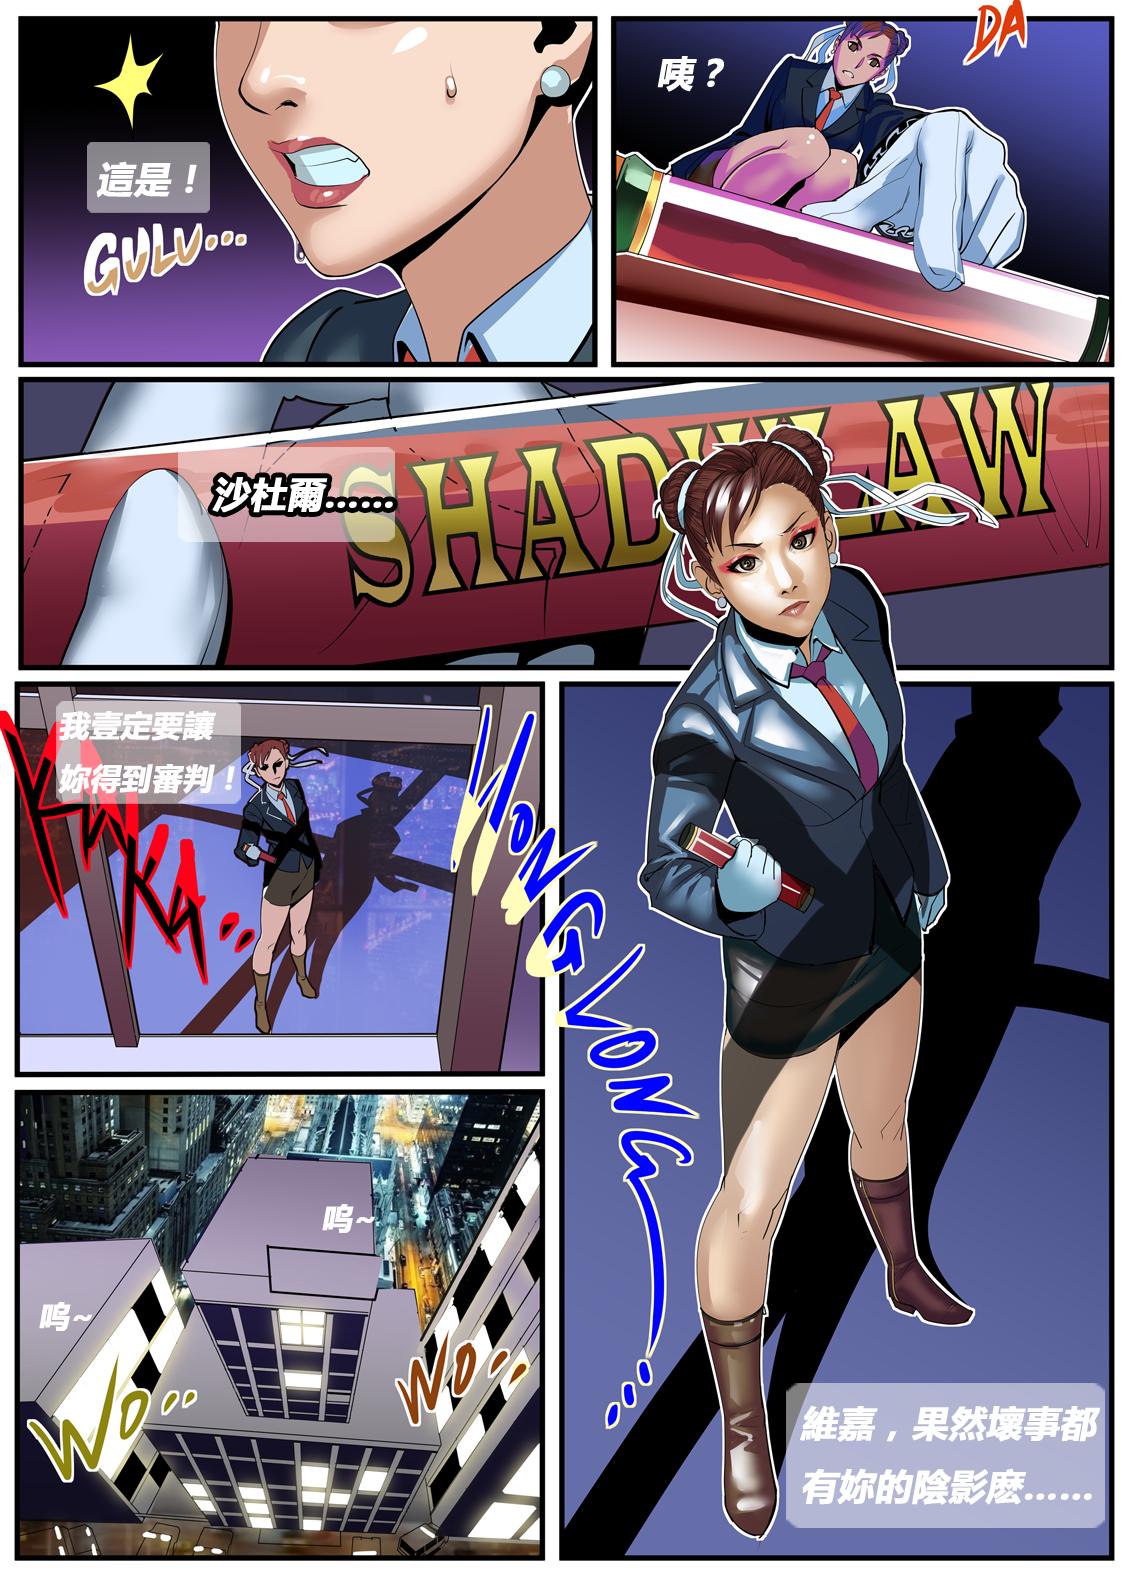 Asses The Lust of Mai Shiranui - King of fighters Raw - Page 61